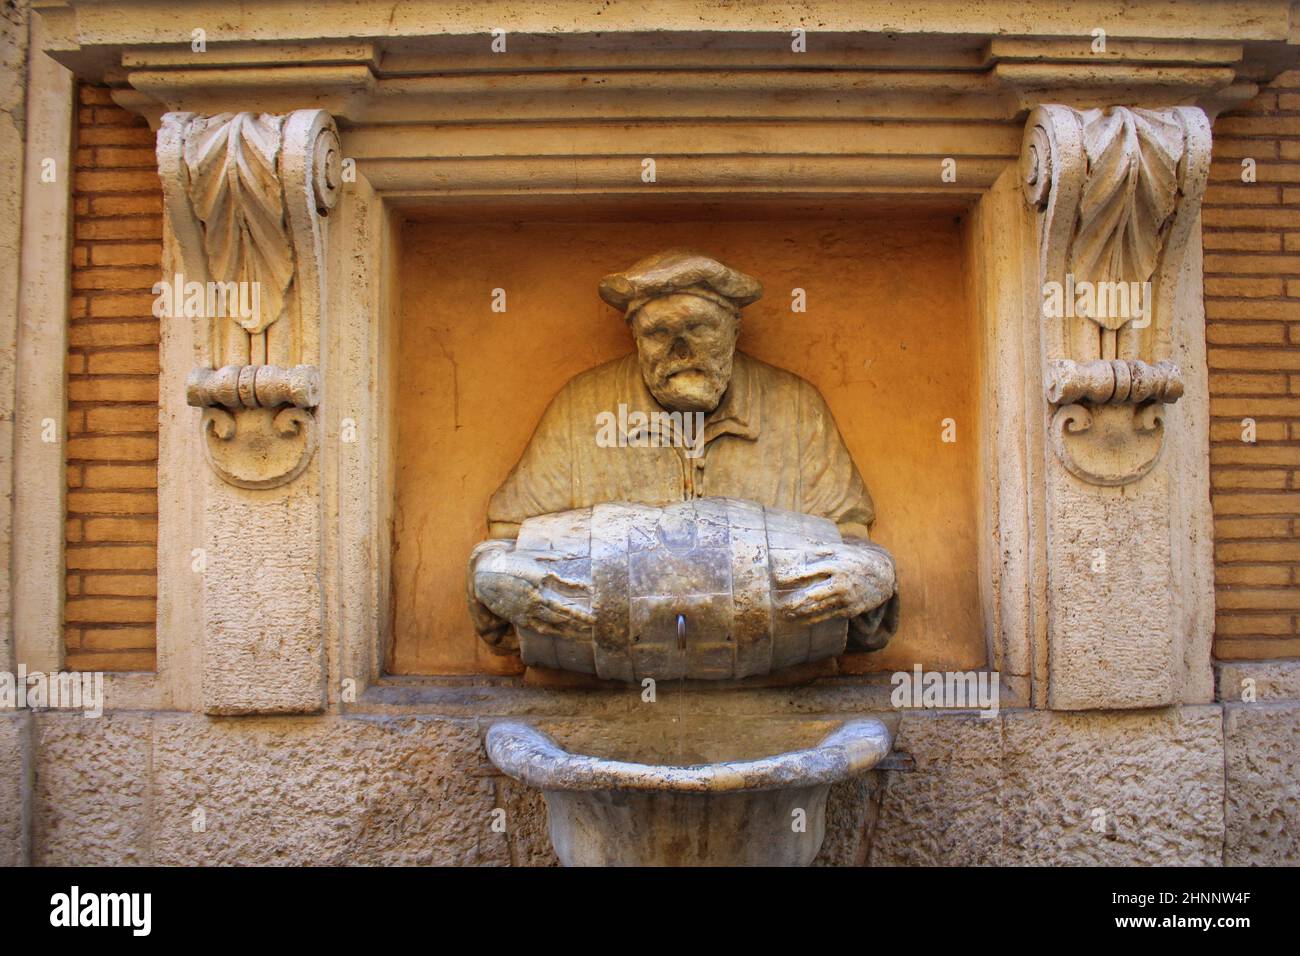 ROME, ITALY - December 28, 2018: Statue of an old man pouring water from a barrel used as a fountain nicknamed 'The Porter'. It was made in 1580 and used as a site to post satirical writings. Stock Photo